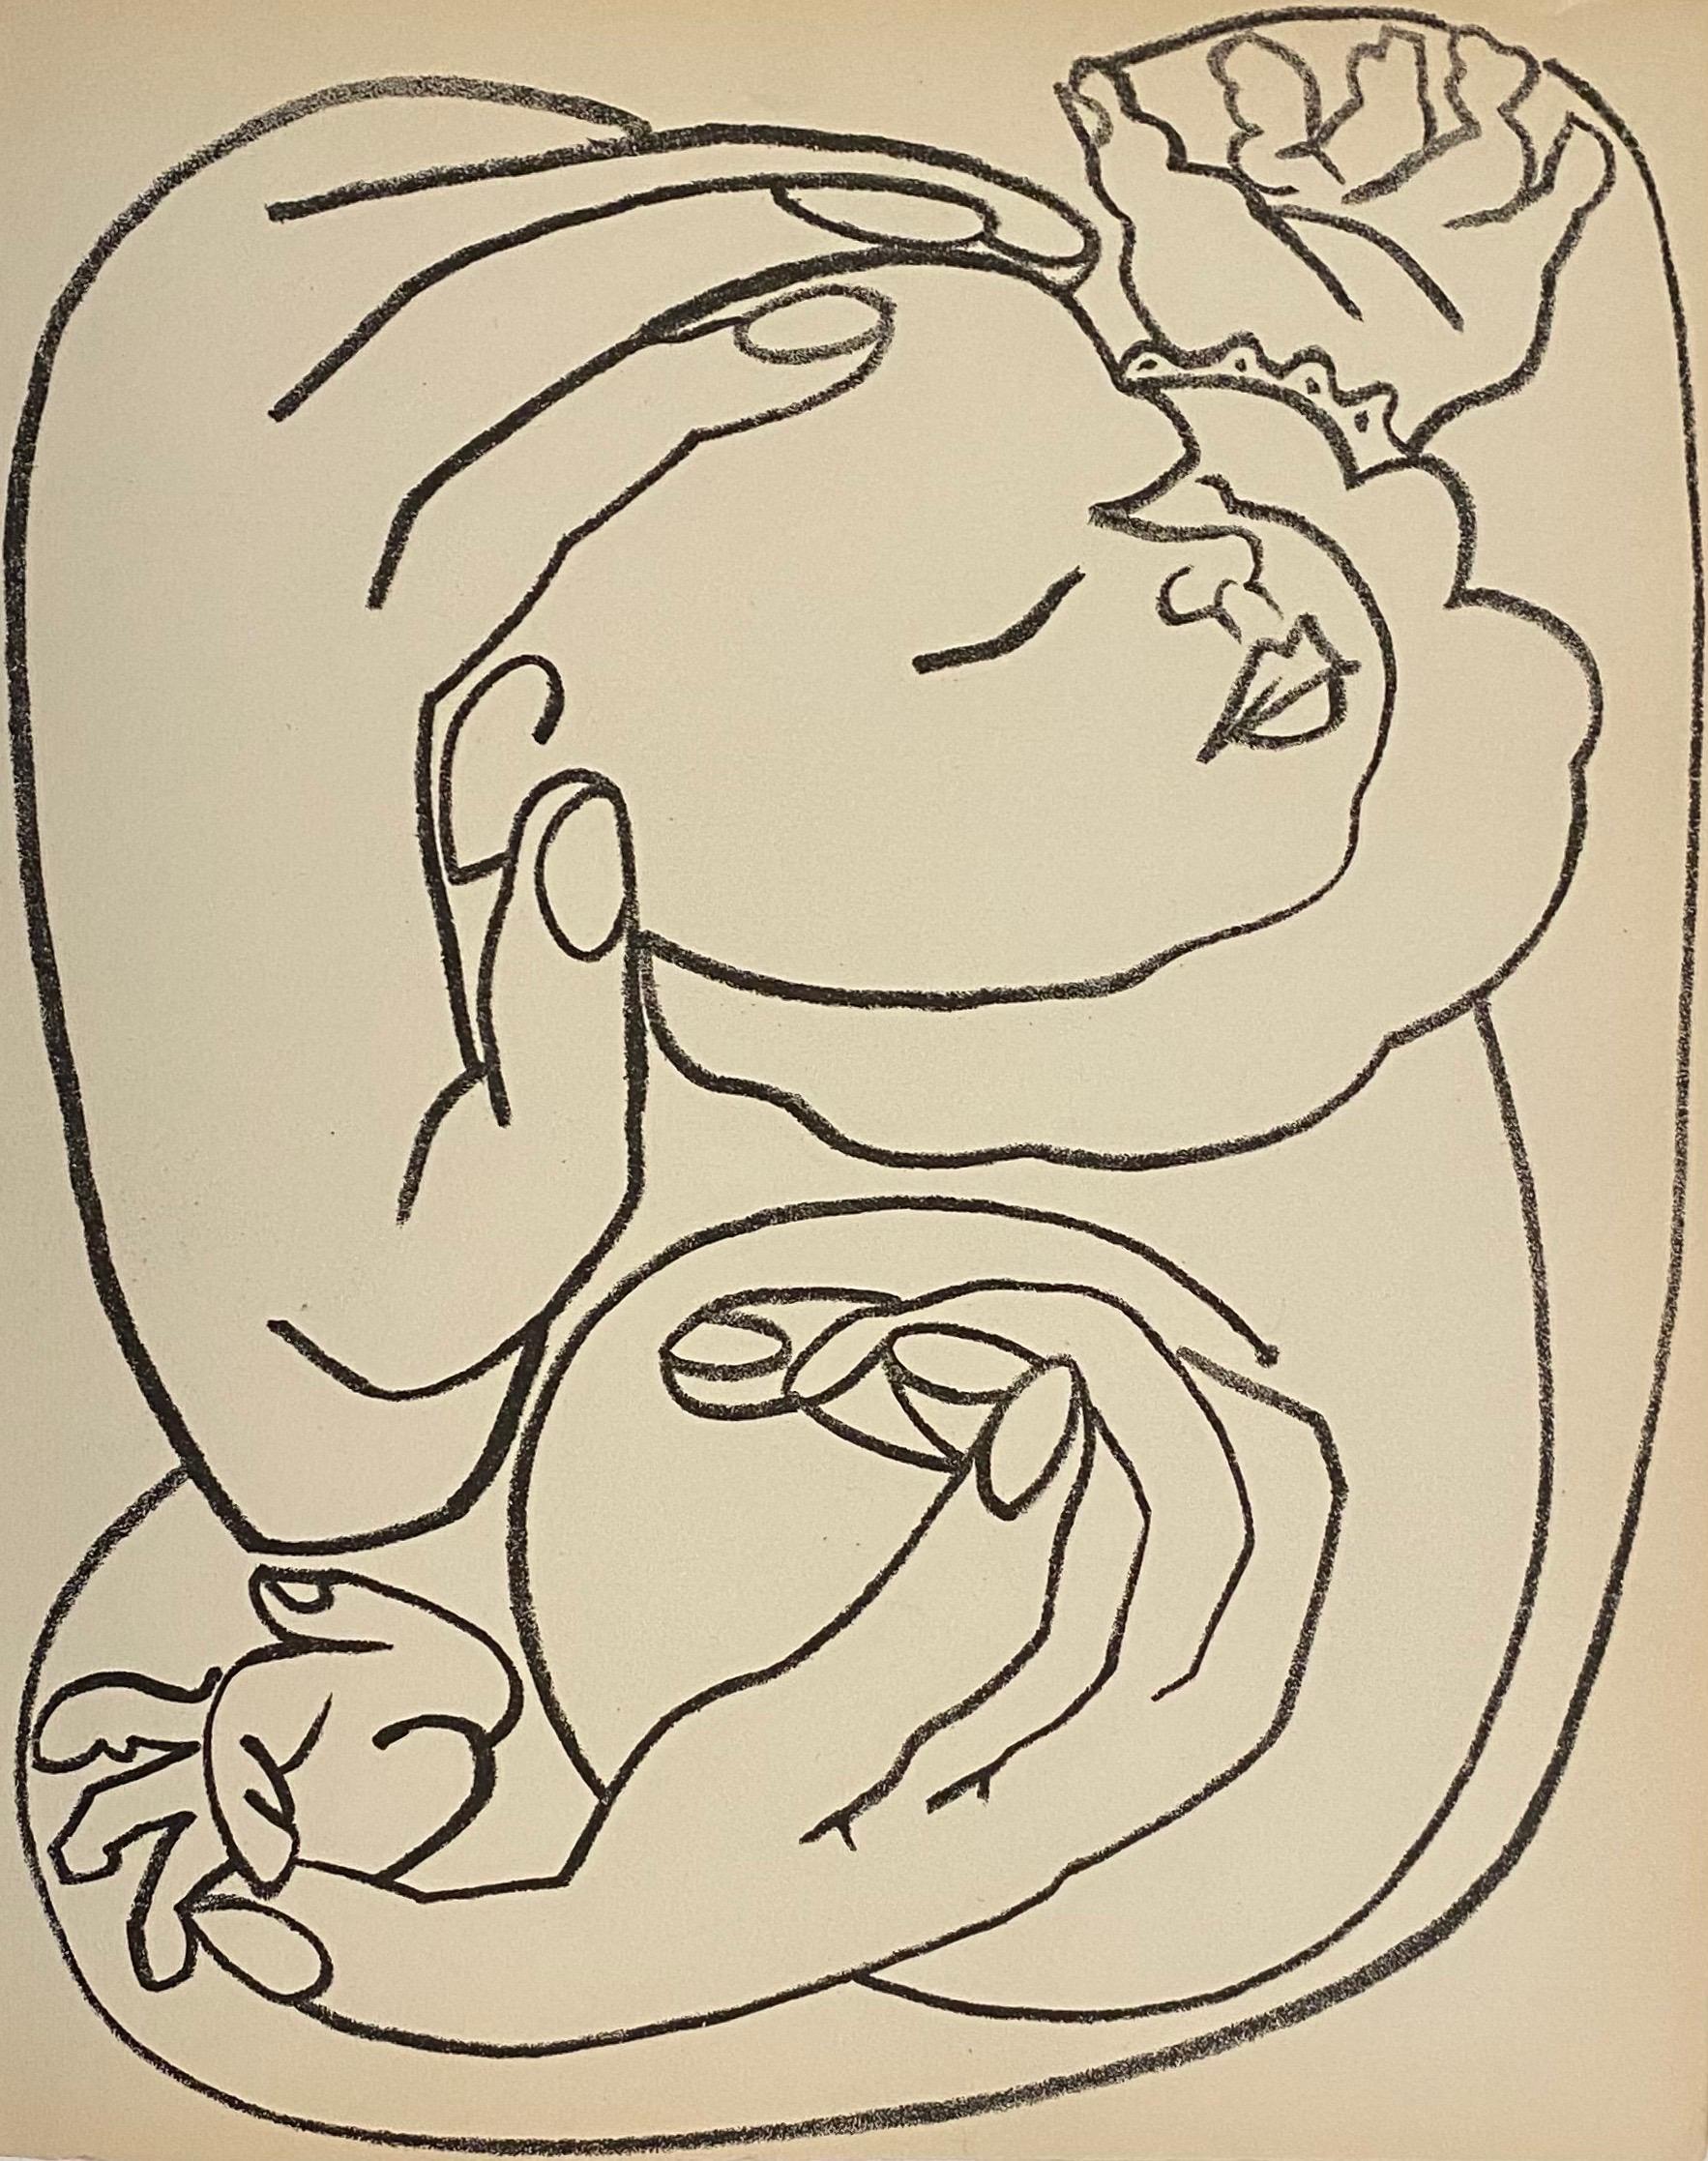 Baby in Arms, Original French Mourlot Modernist Lithograph 1950s Francoise Gilot